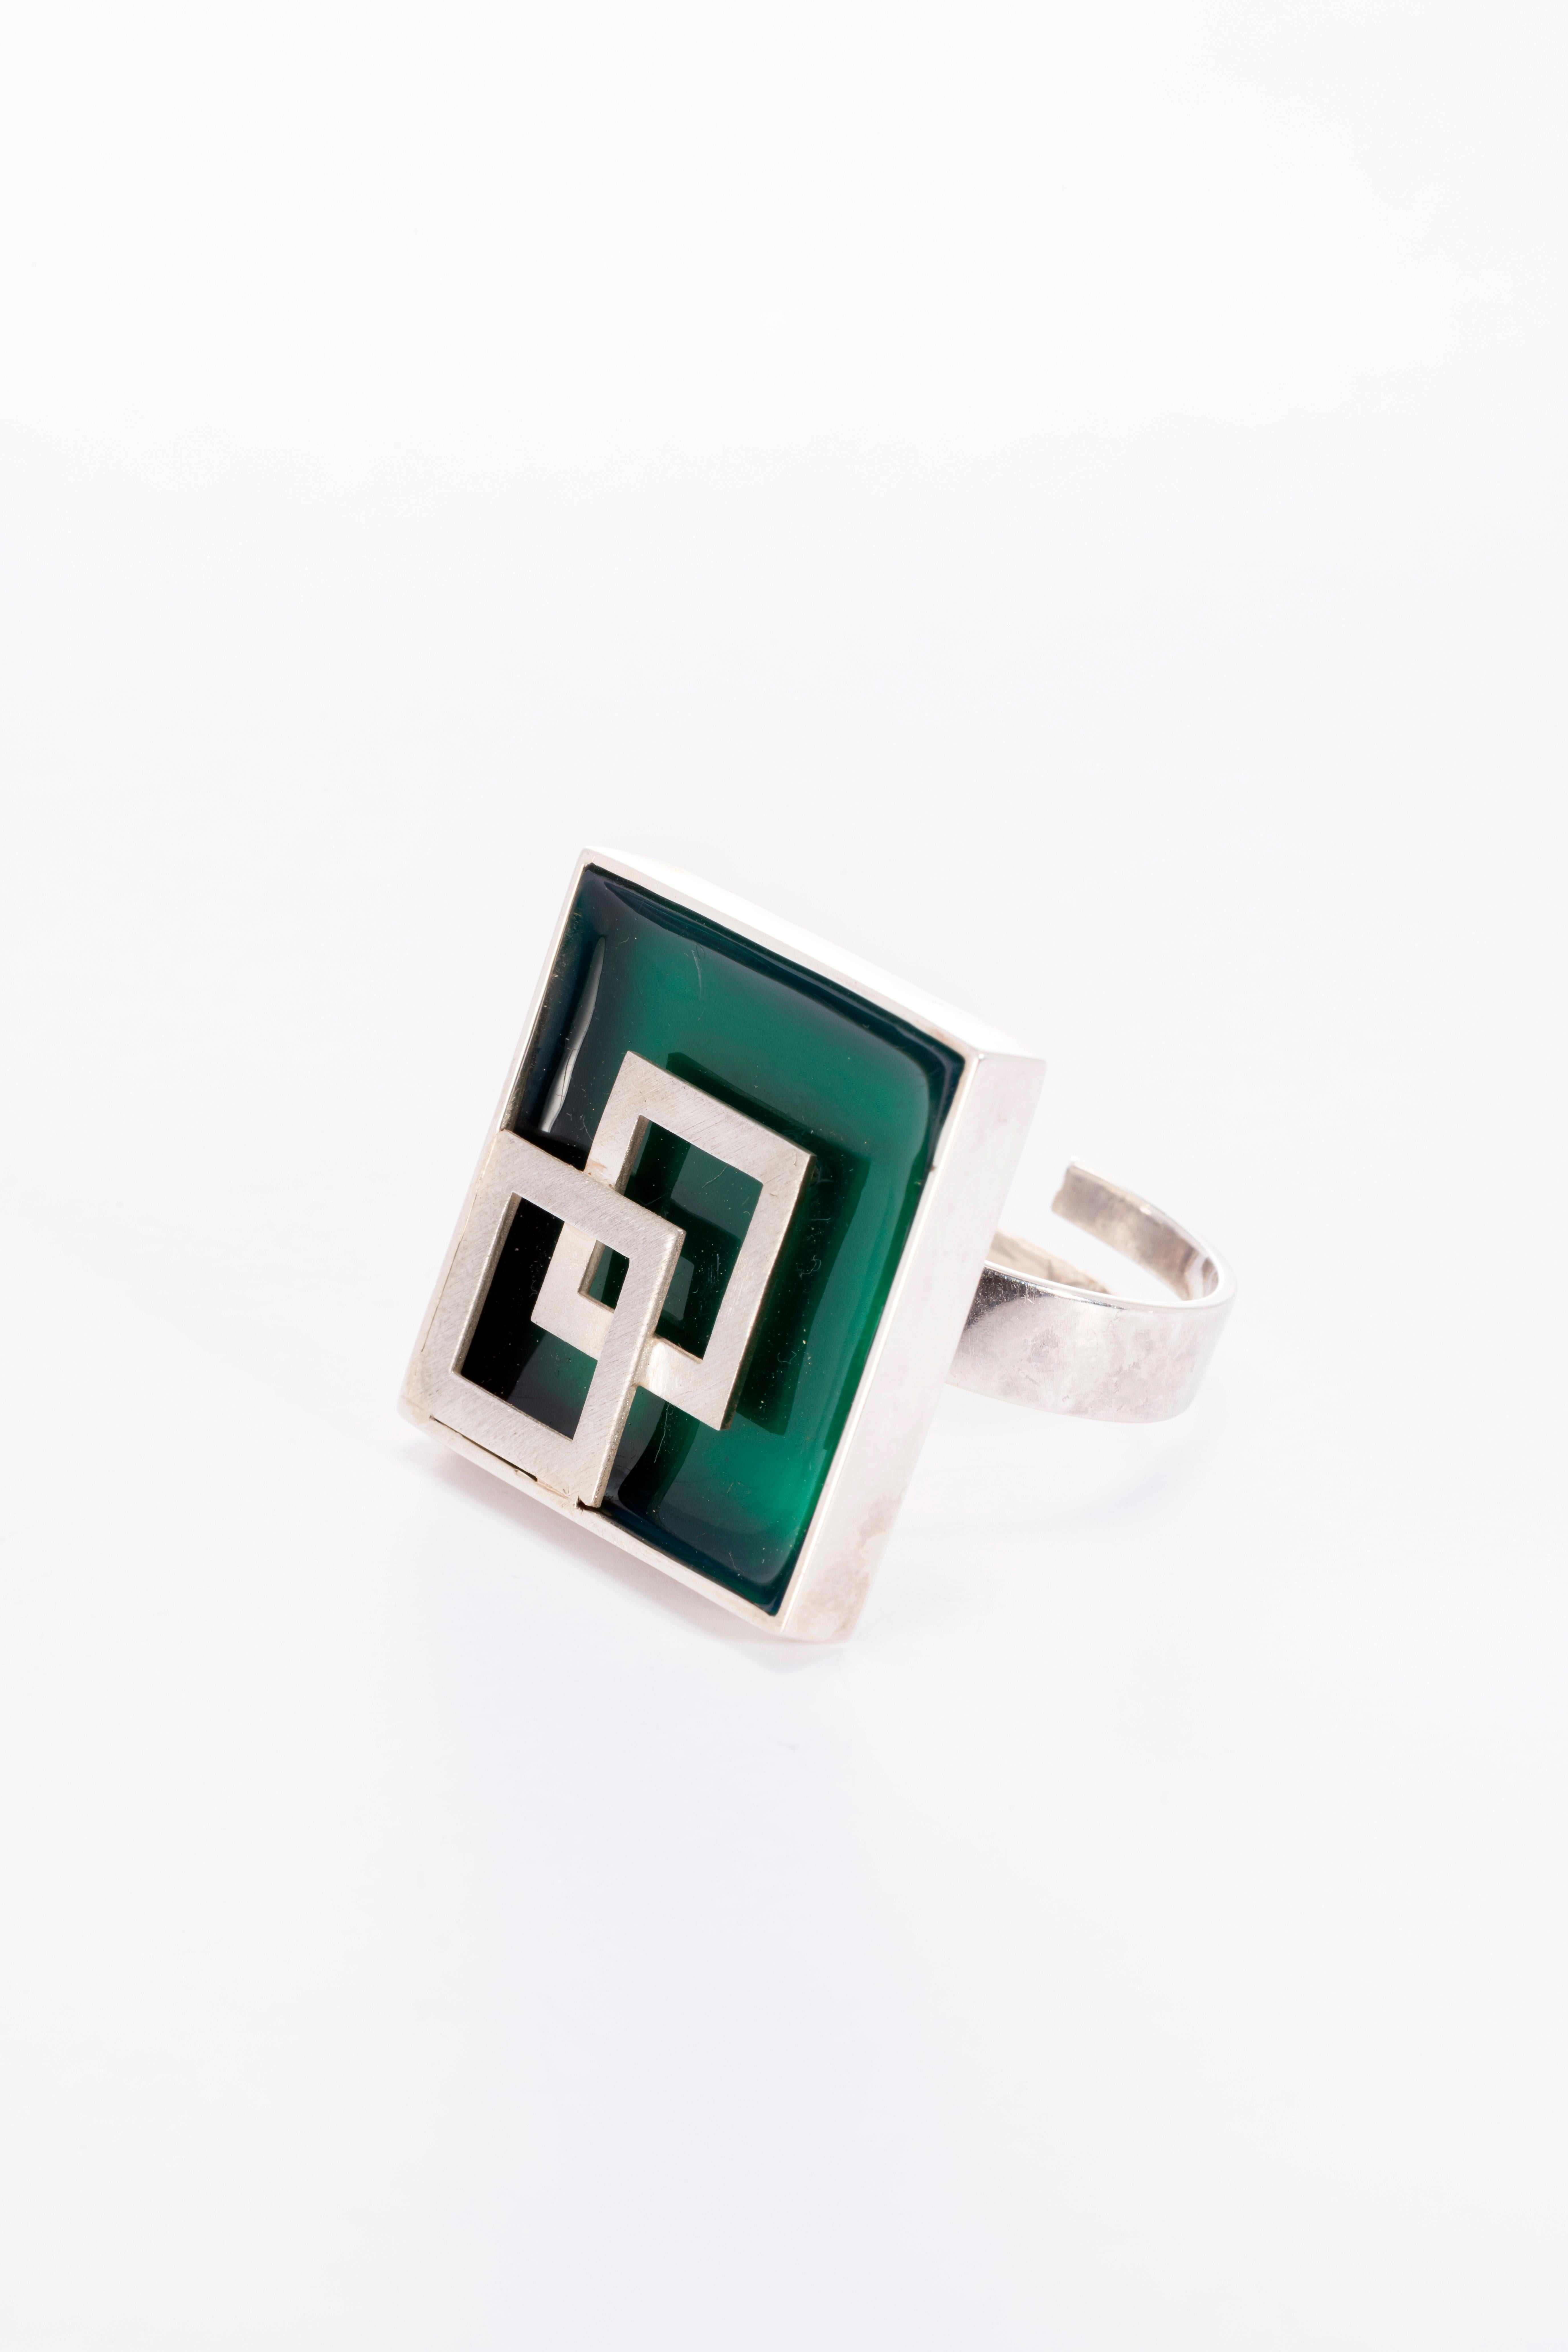 Women's Sterlingsilver, Enamelled, Contemporary, Square, Handmade in Istanbul For Sale